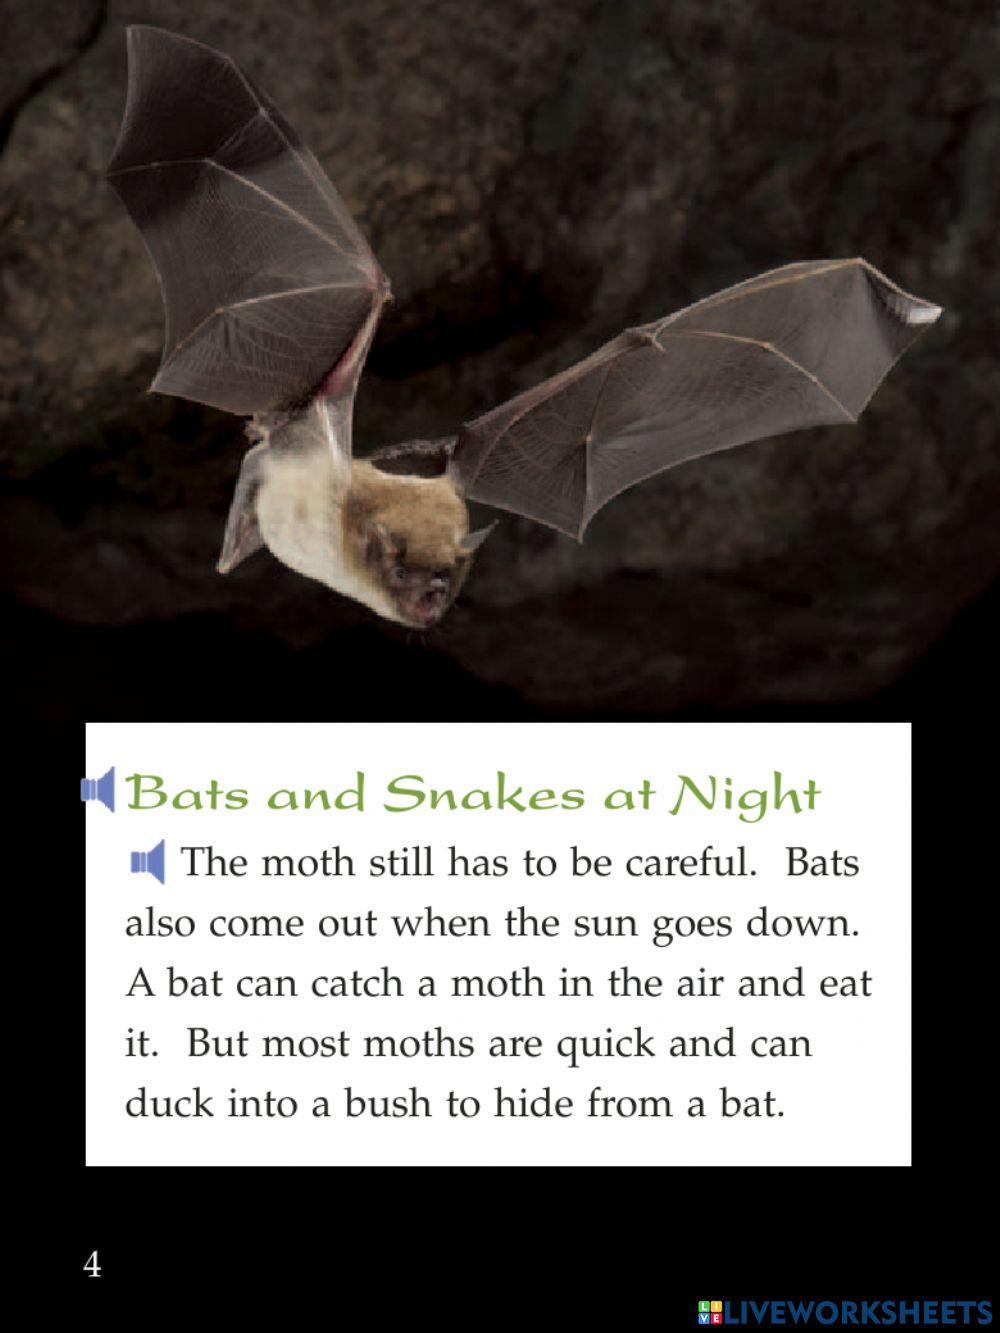 Chased by a bat